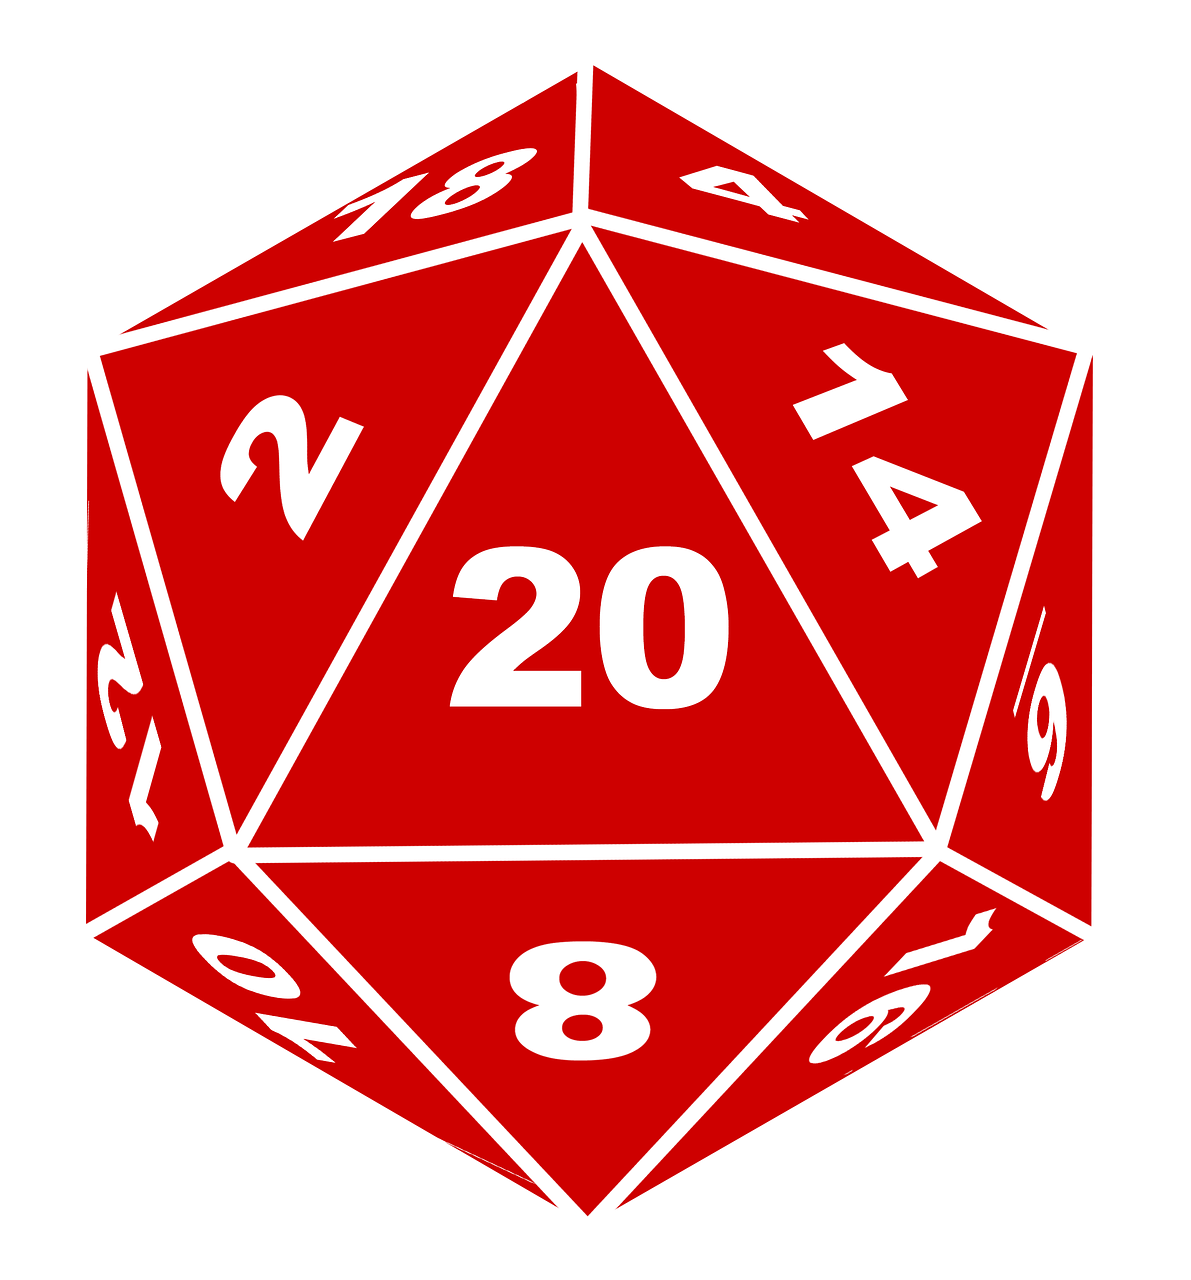 d20 dice dungeons dragons free photo